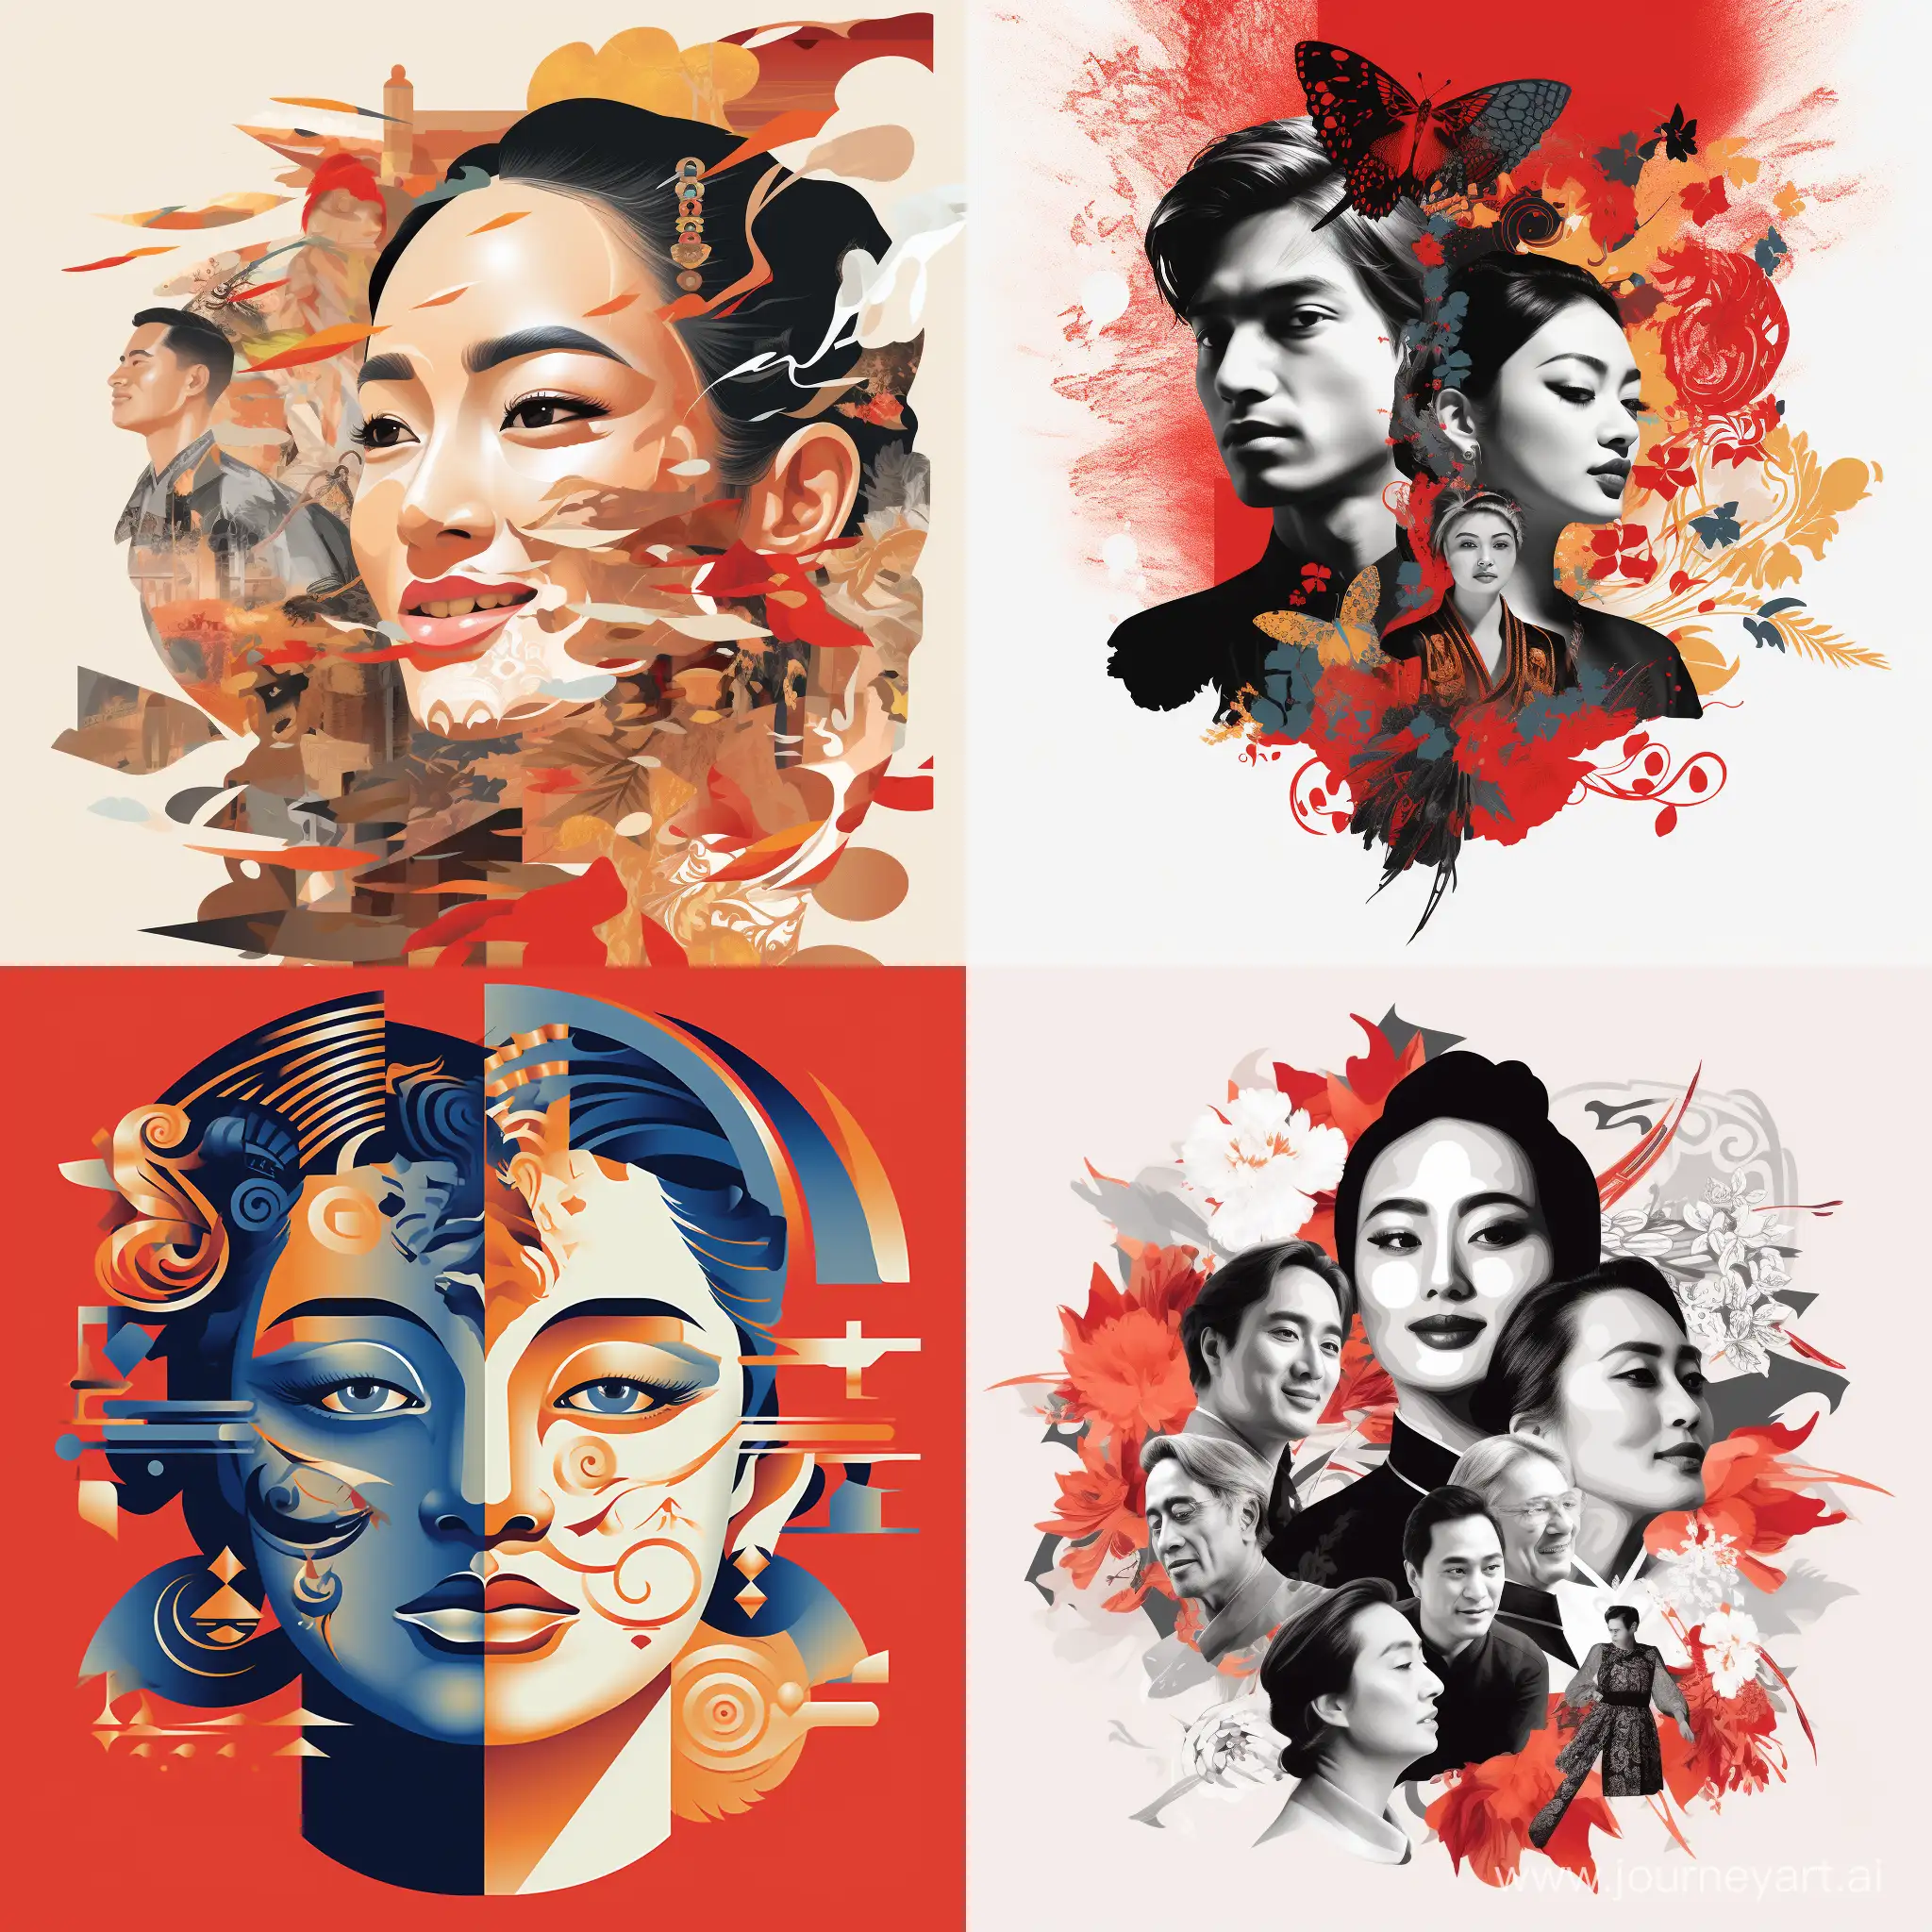 Cultural-Fusion-Vibrant-Indian-and-Japanese-New-Year-Celebration-Art